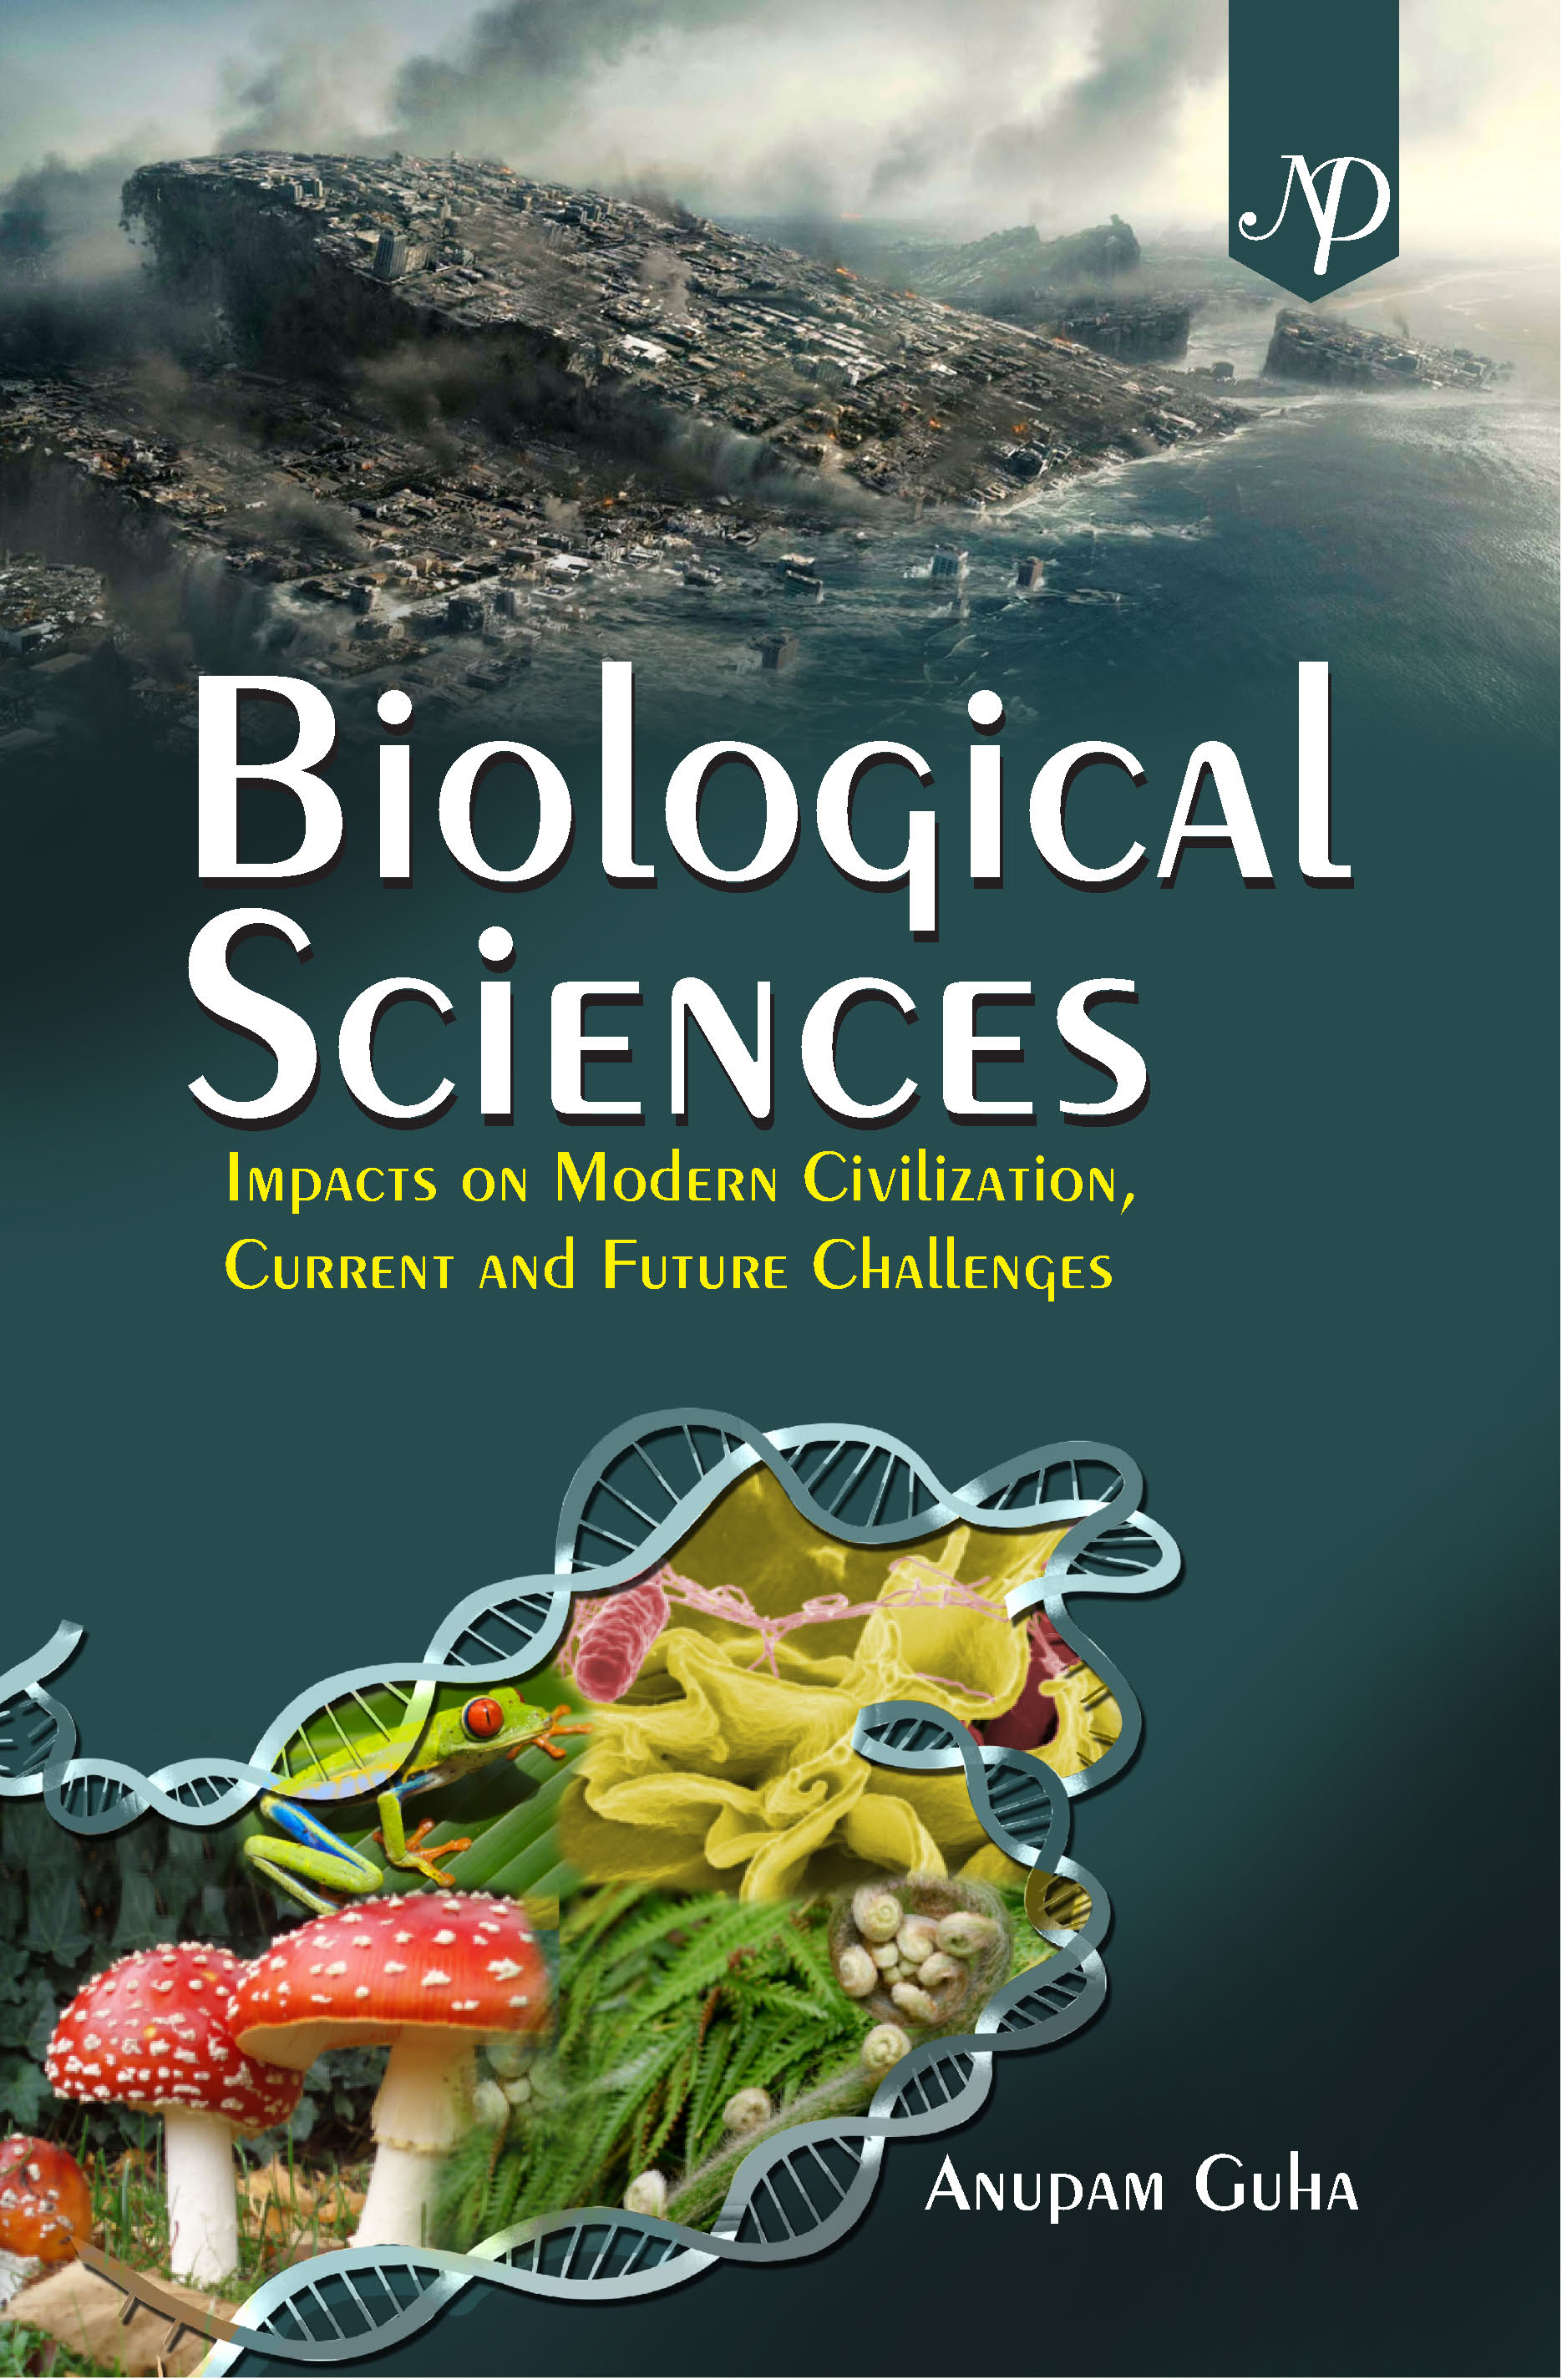 Biological Sciences- Impacts on Modern Civilization, Current and Future Challenges Cover by Anupam Guha.jpg